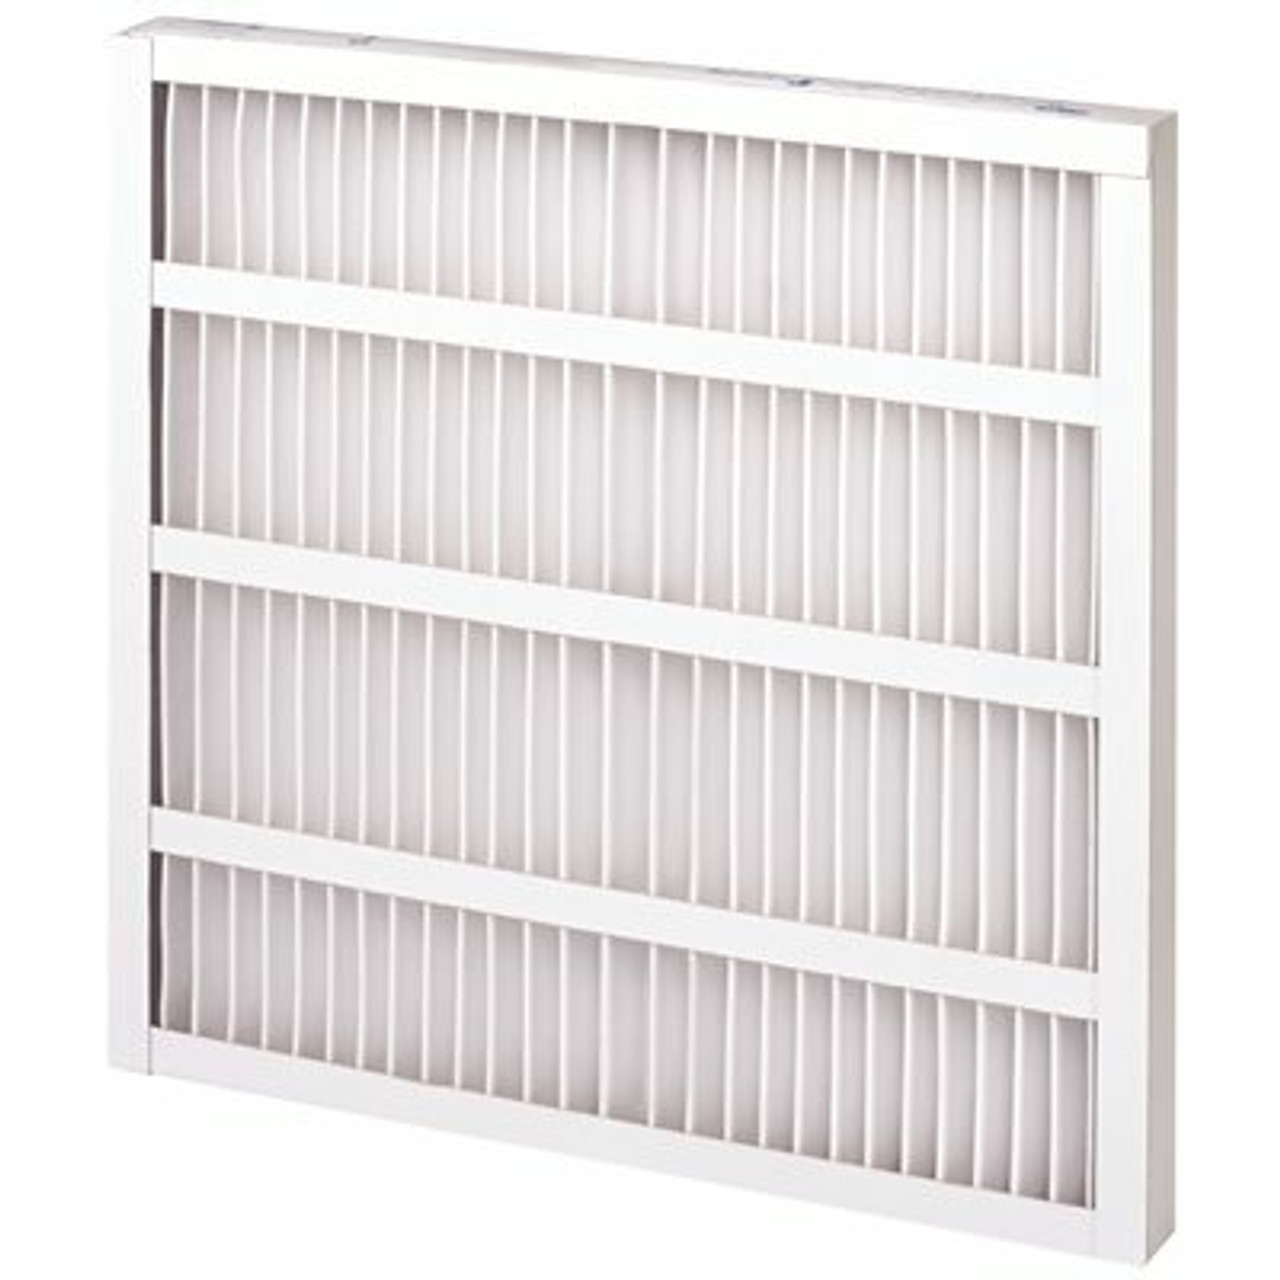 20 In. X 25 In. X 2 Pleated Air Filter Standard Capacity Self Supported MERV 8 (12-Case)